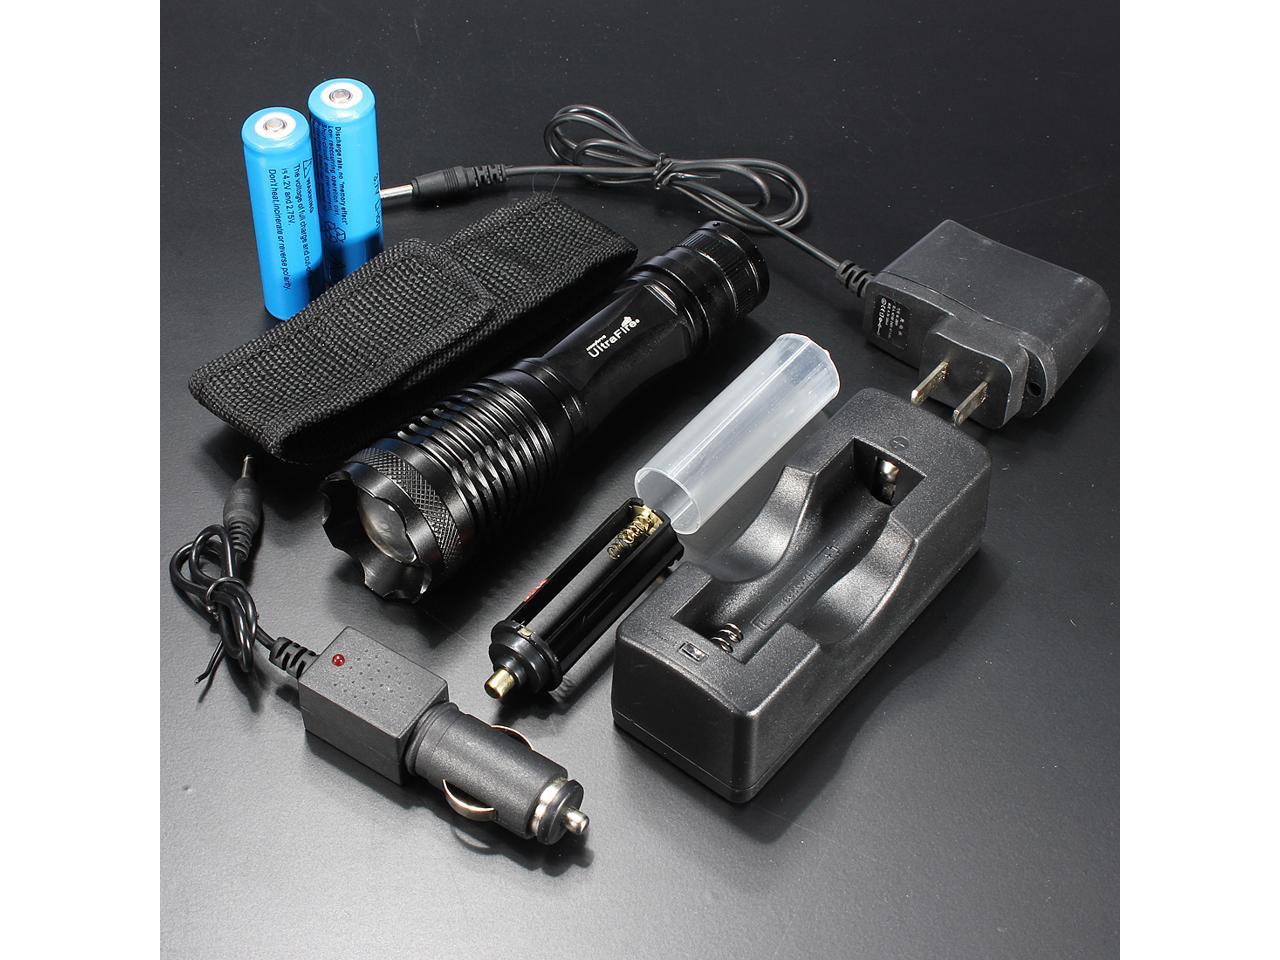 Ultrafire CREE XM-L T6 Zoomable 6000 Lumen Tactical LED Flashlight Torch Lamp 